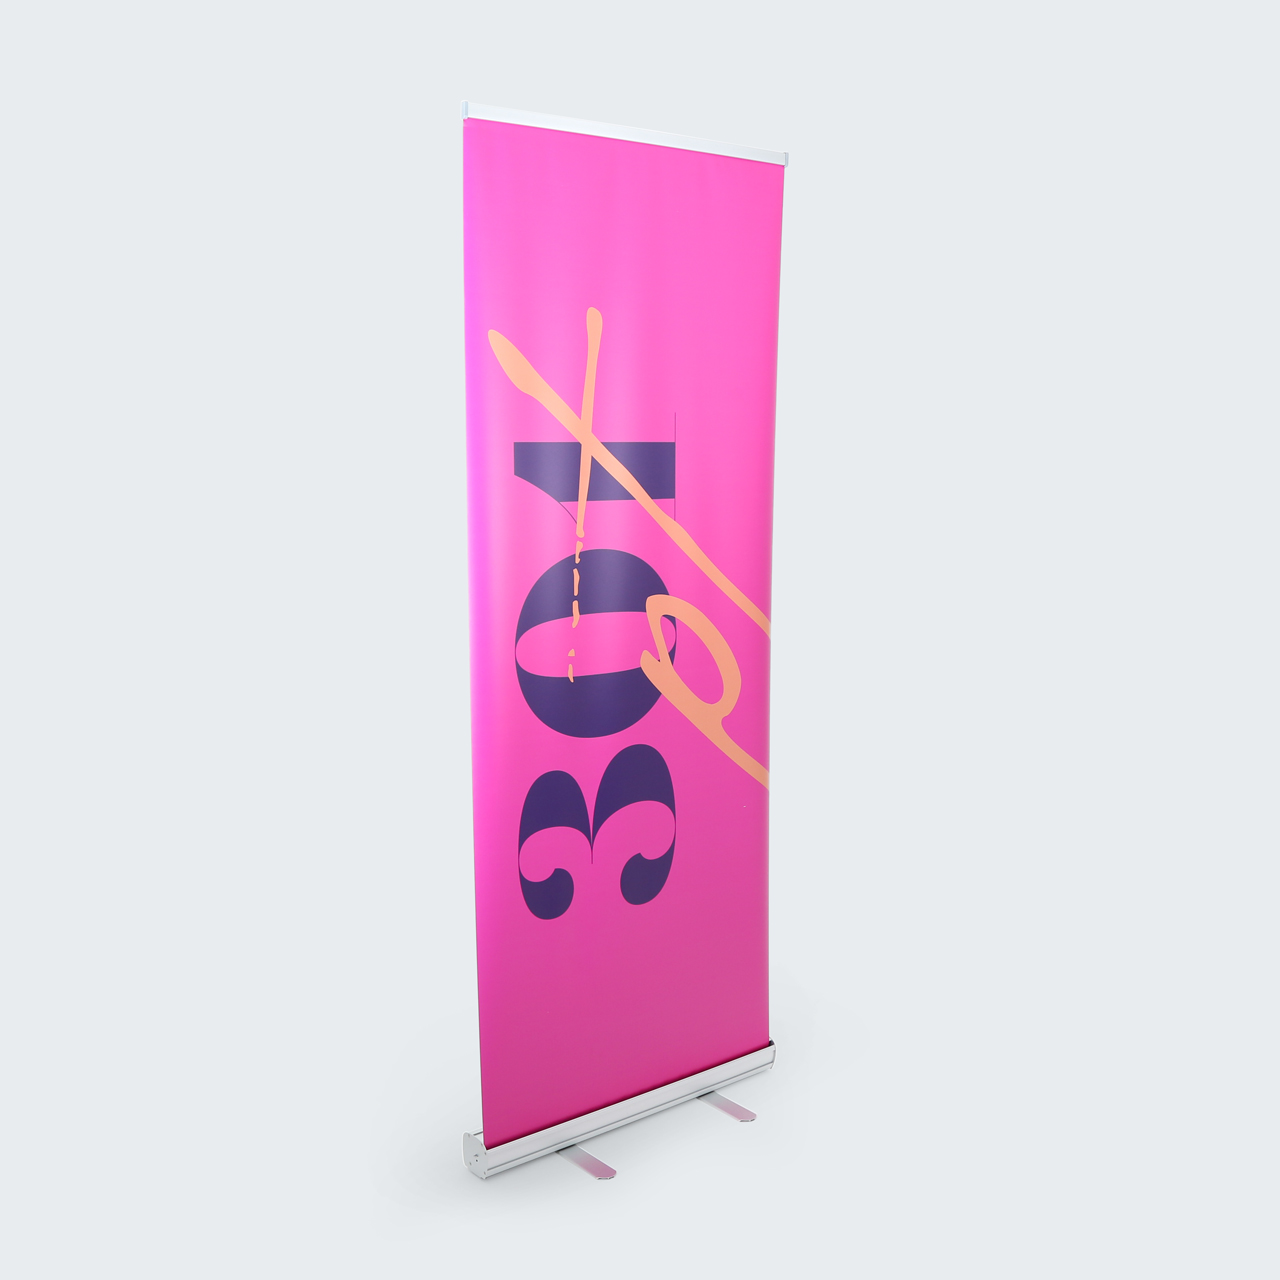 A pop-up banner printed with a hot pink background and 